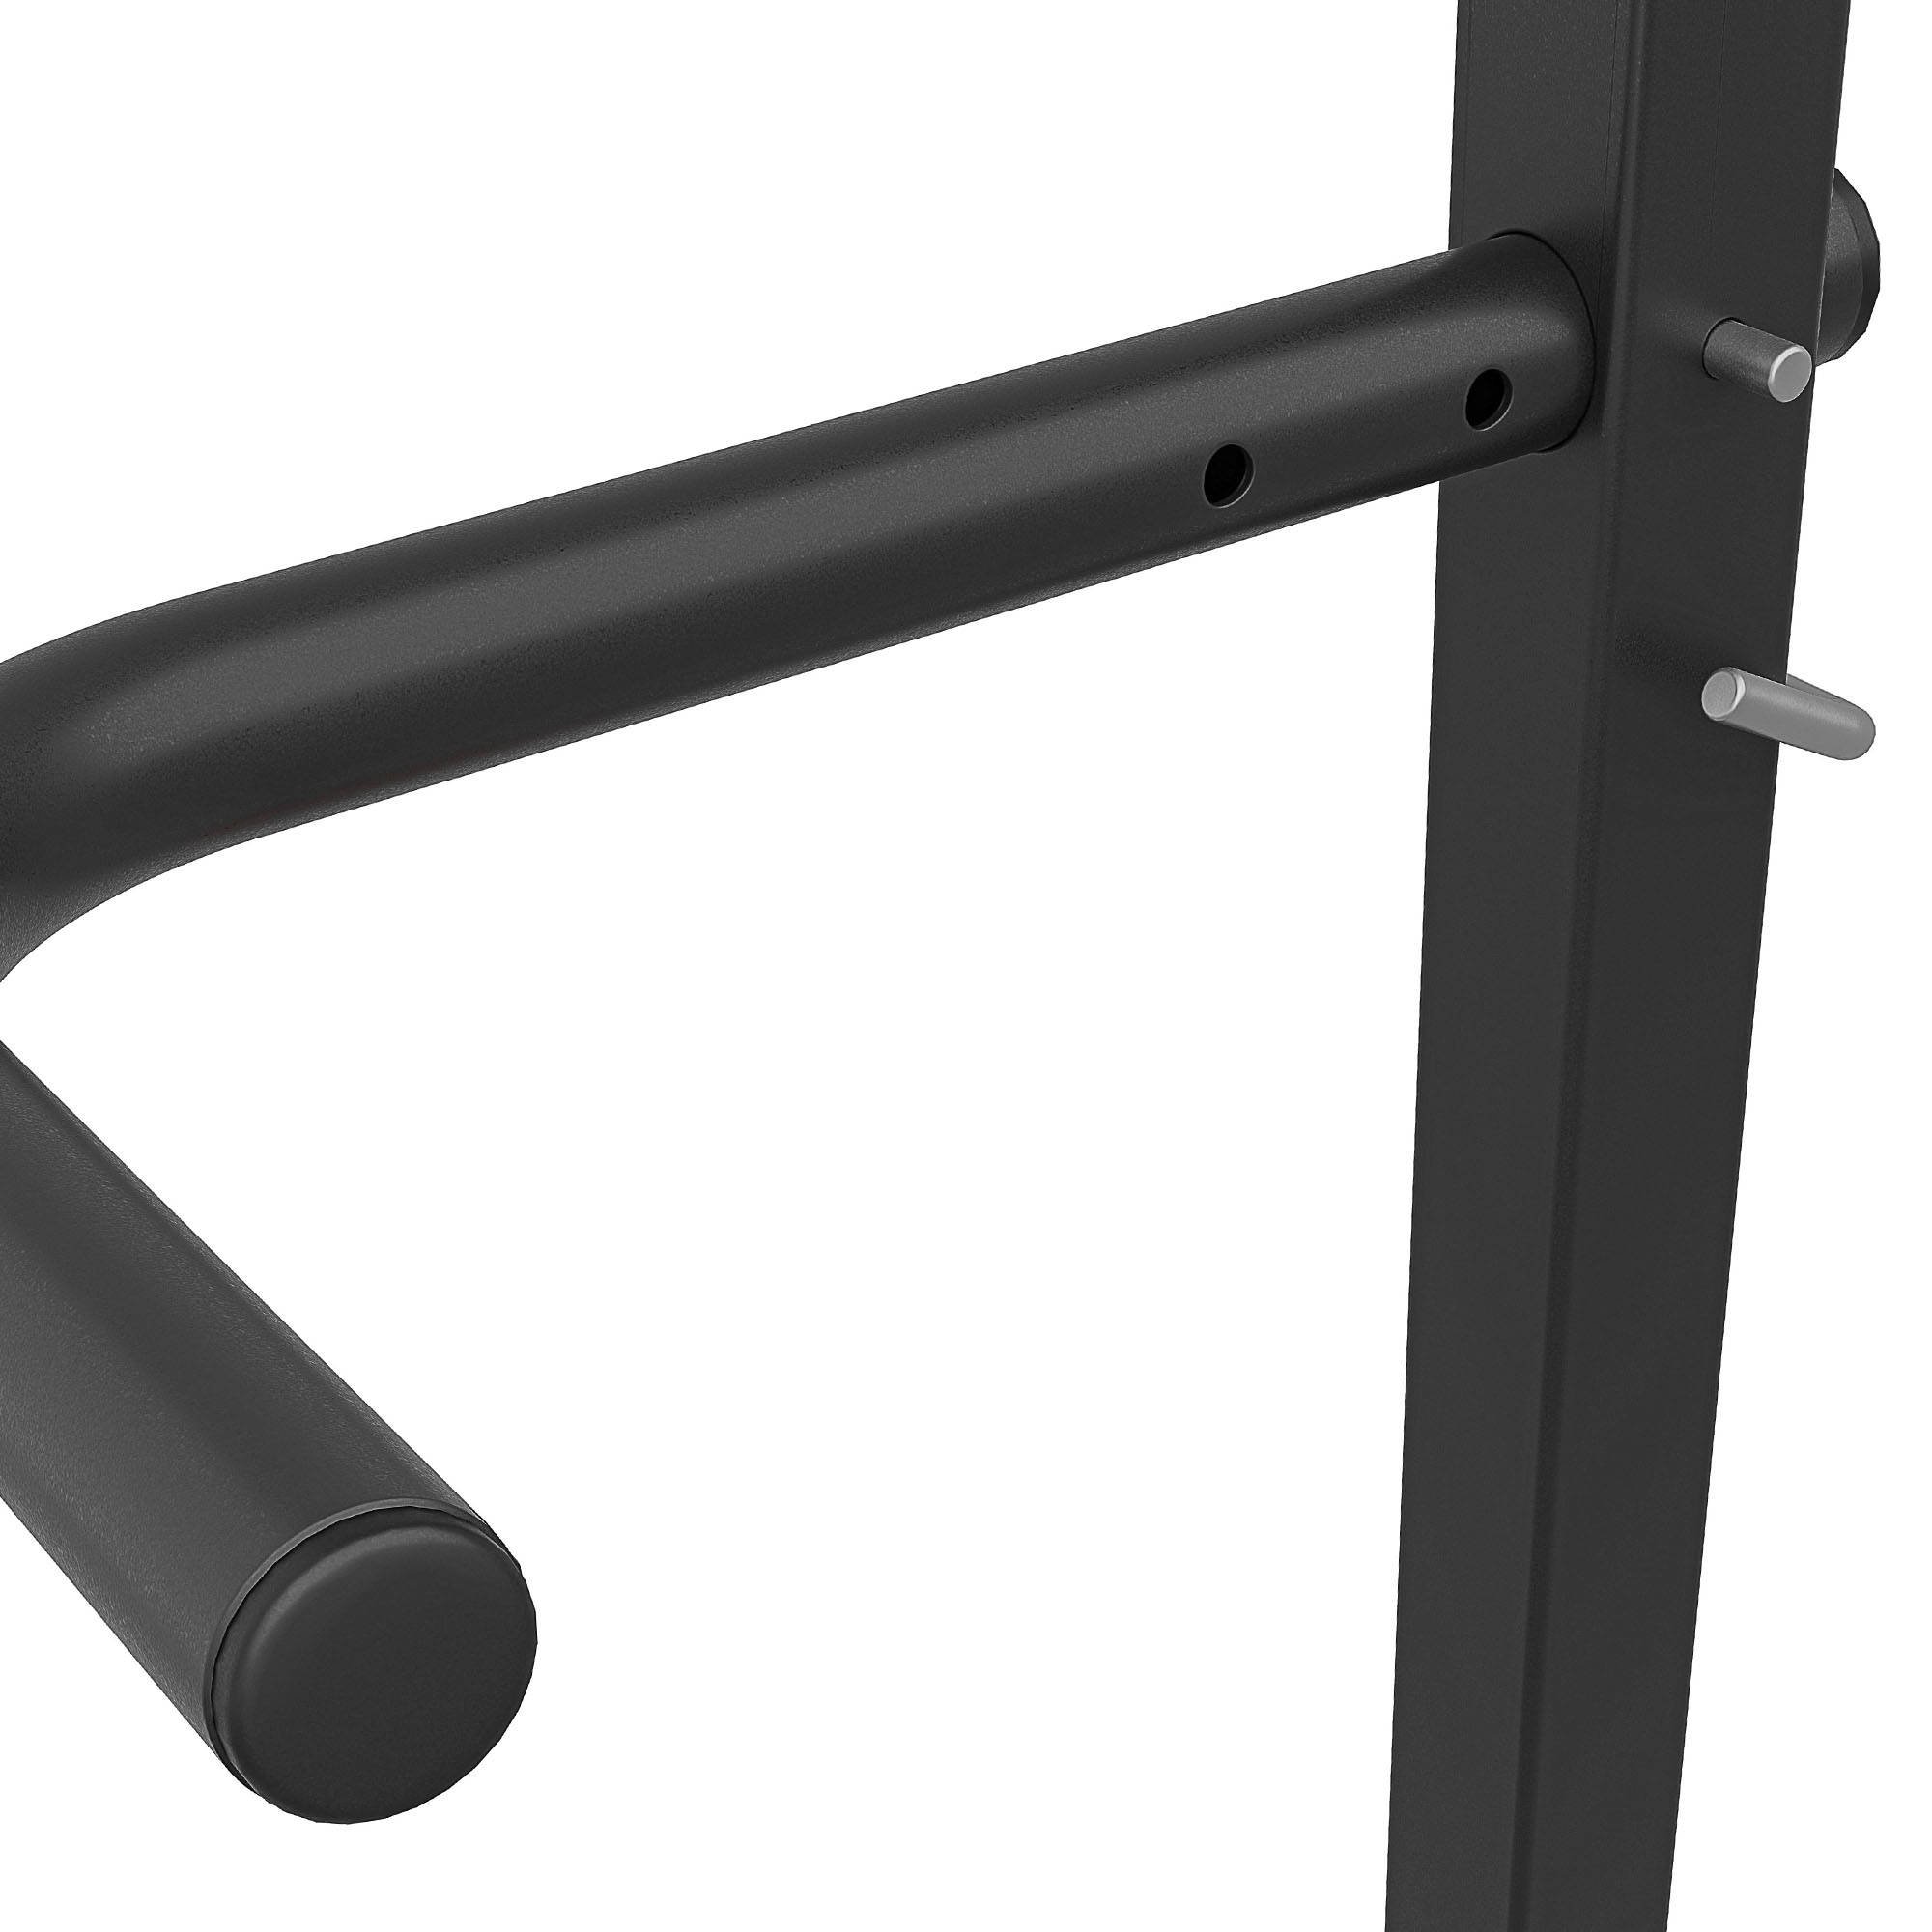 External ladder + pull-up bar with bag holder MO-Z4 - Marbo Sport, Outdoor  Black Week 2023 Cyber Week 2023 Equipment for outdoor use